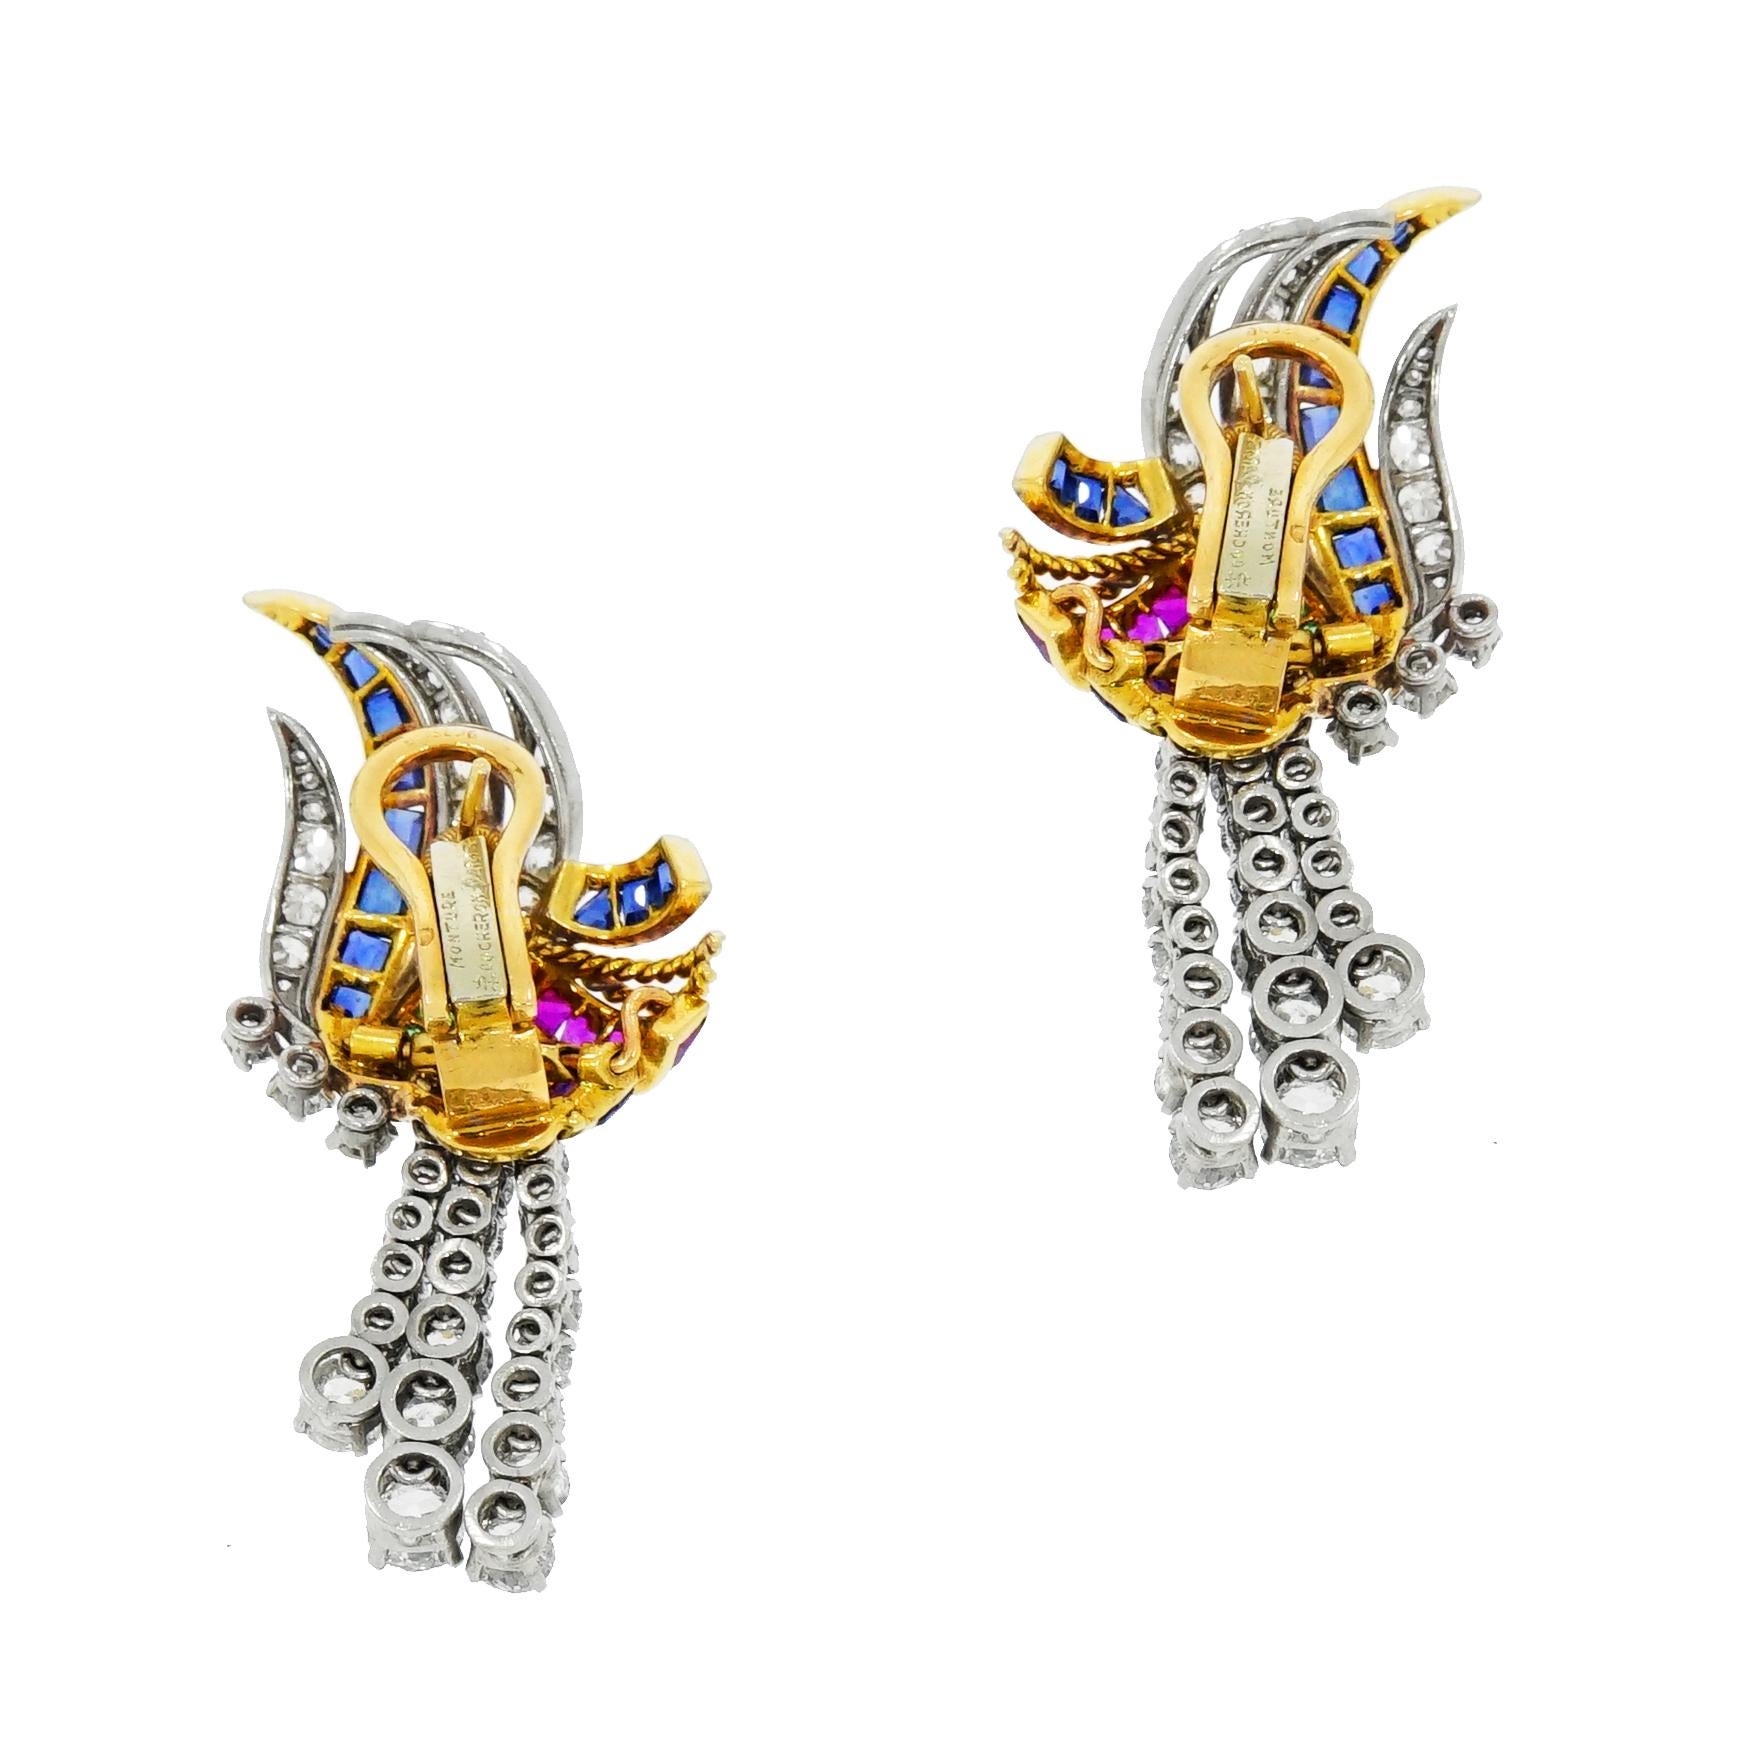 A truly gorgeous vintage drop earrings with vivid sapphires, rubies, amethyst and emeralds, reminiscent of ribbons and feathers that stands out beautifully against the bright white round diamonds set in white gold. The timeless design is glamorous,